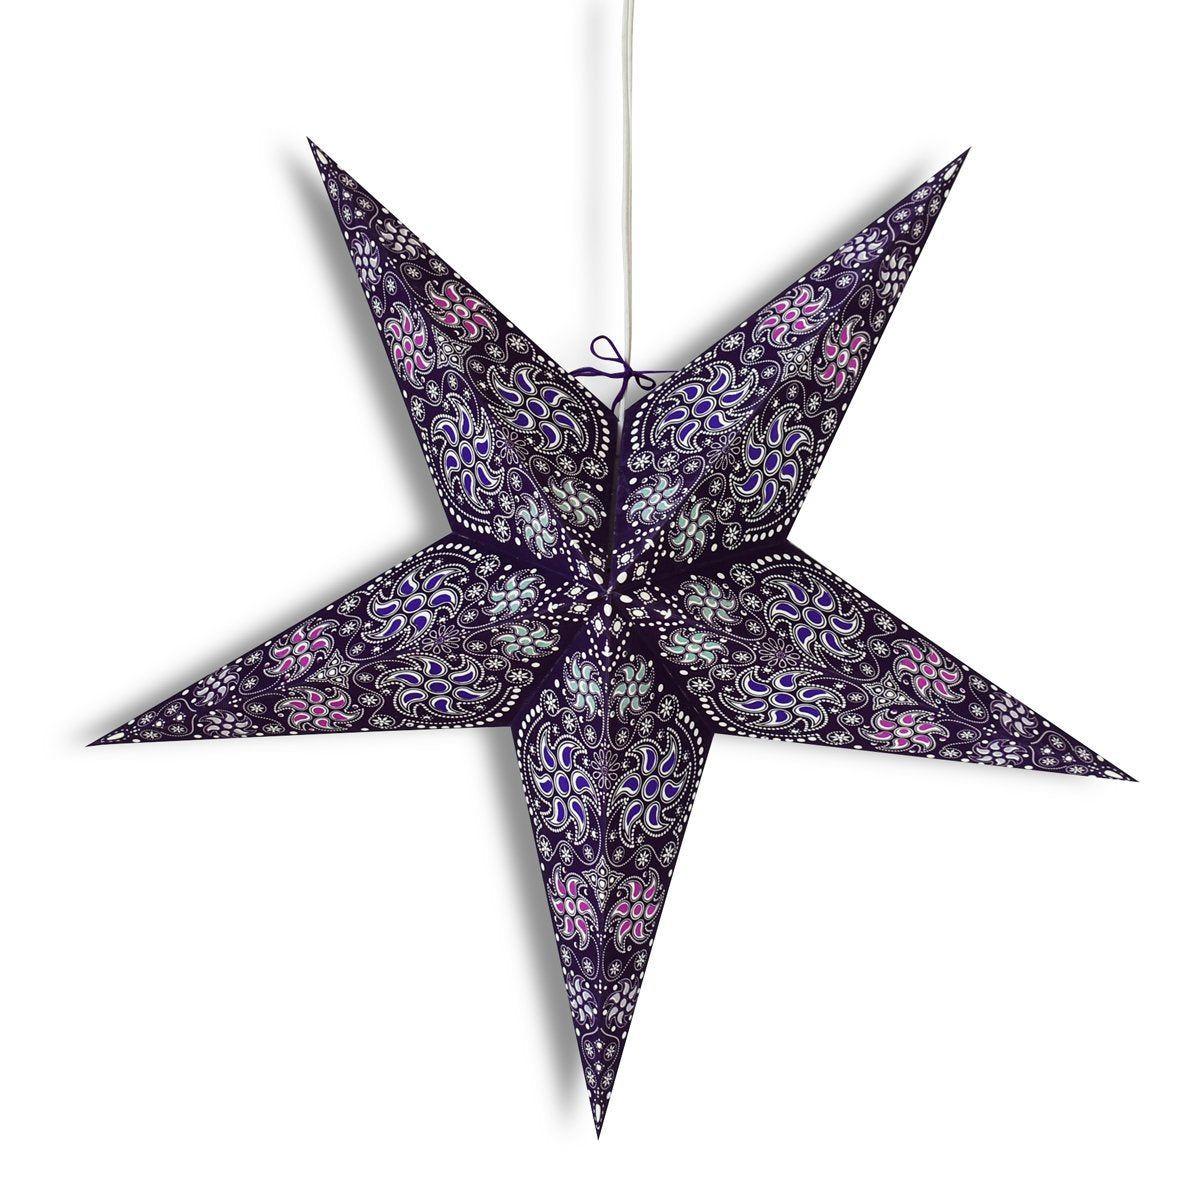 3-PACK + Cord | 24&quot; Purple Winds Paper Star Lantern and Lamp Cord Hanging Decoration - PaperLanternStore.com - Paper Lanterns, Decor, Party Lights &amp; More